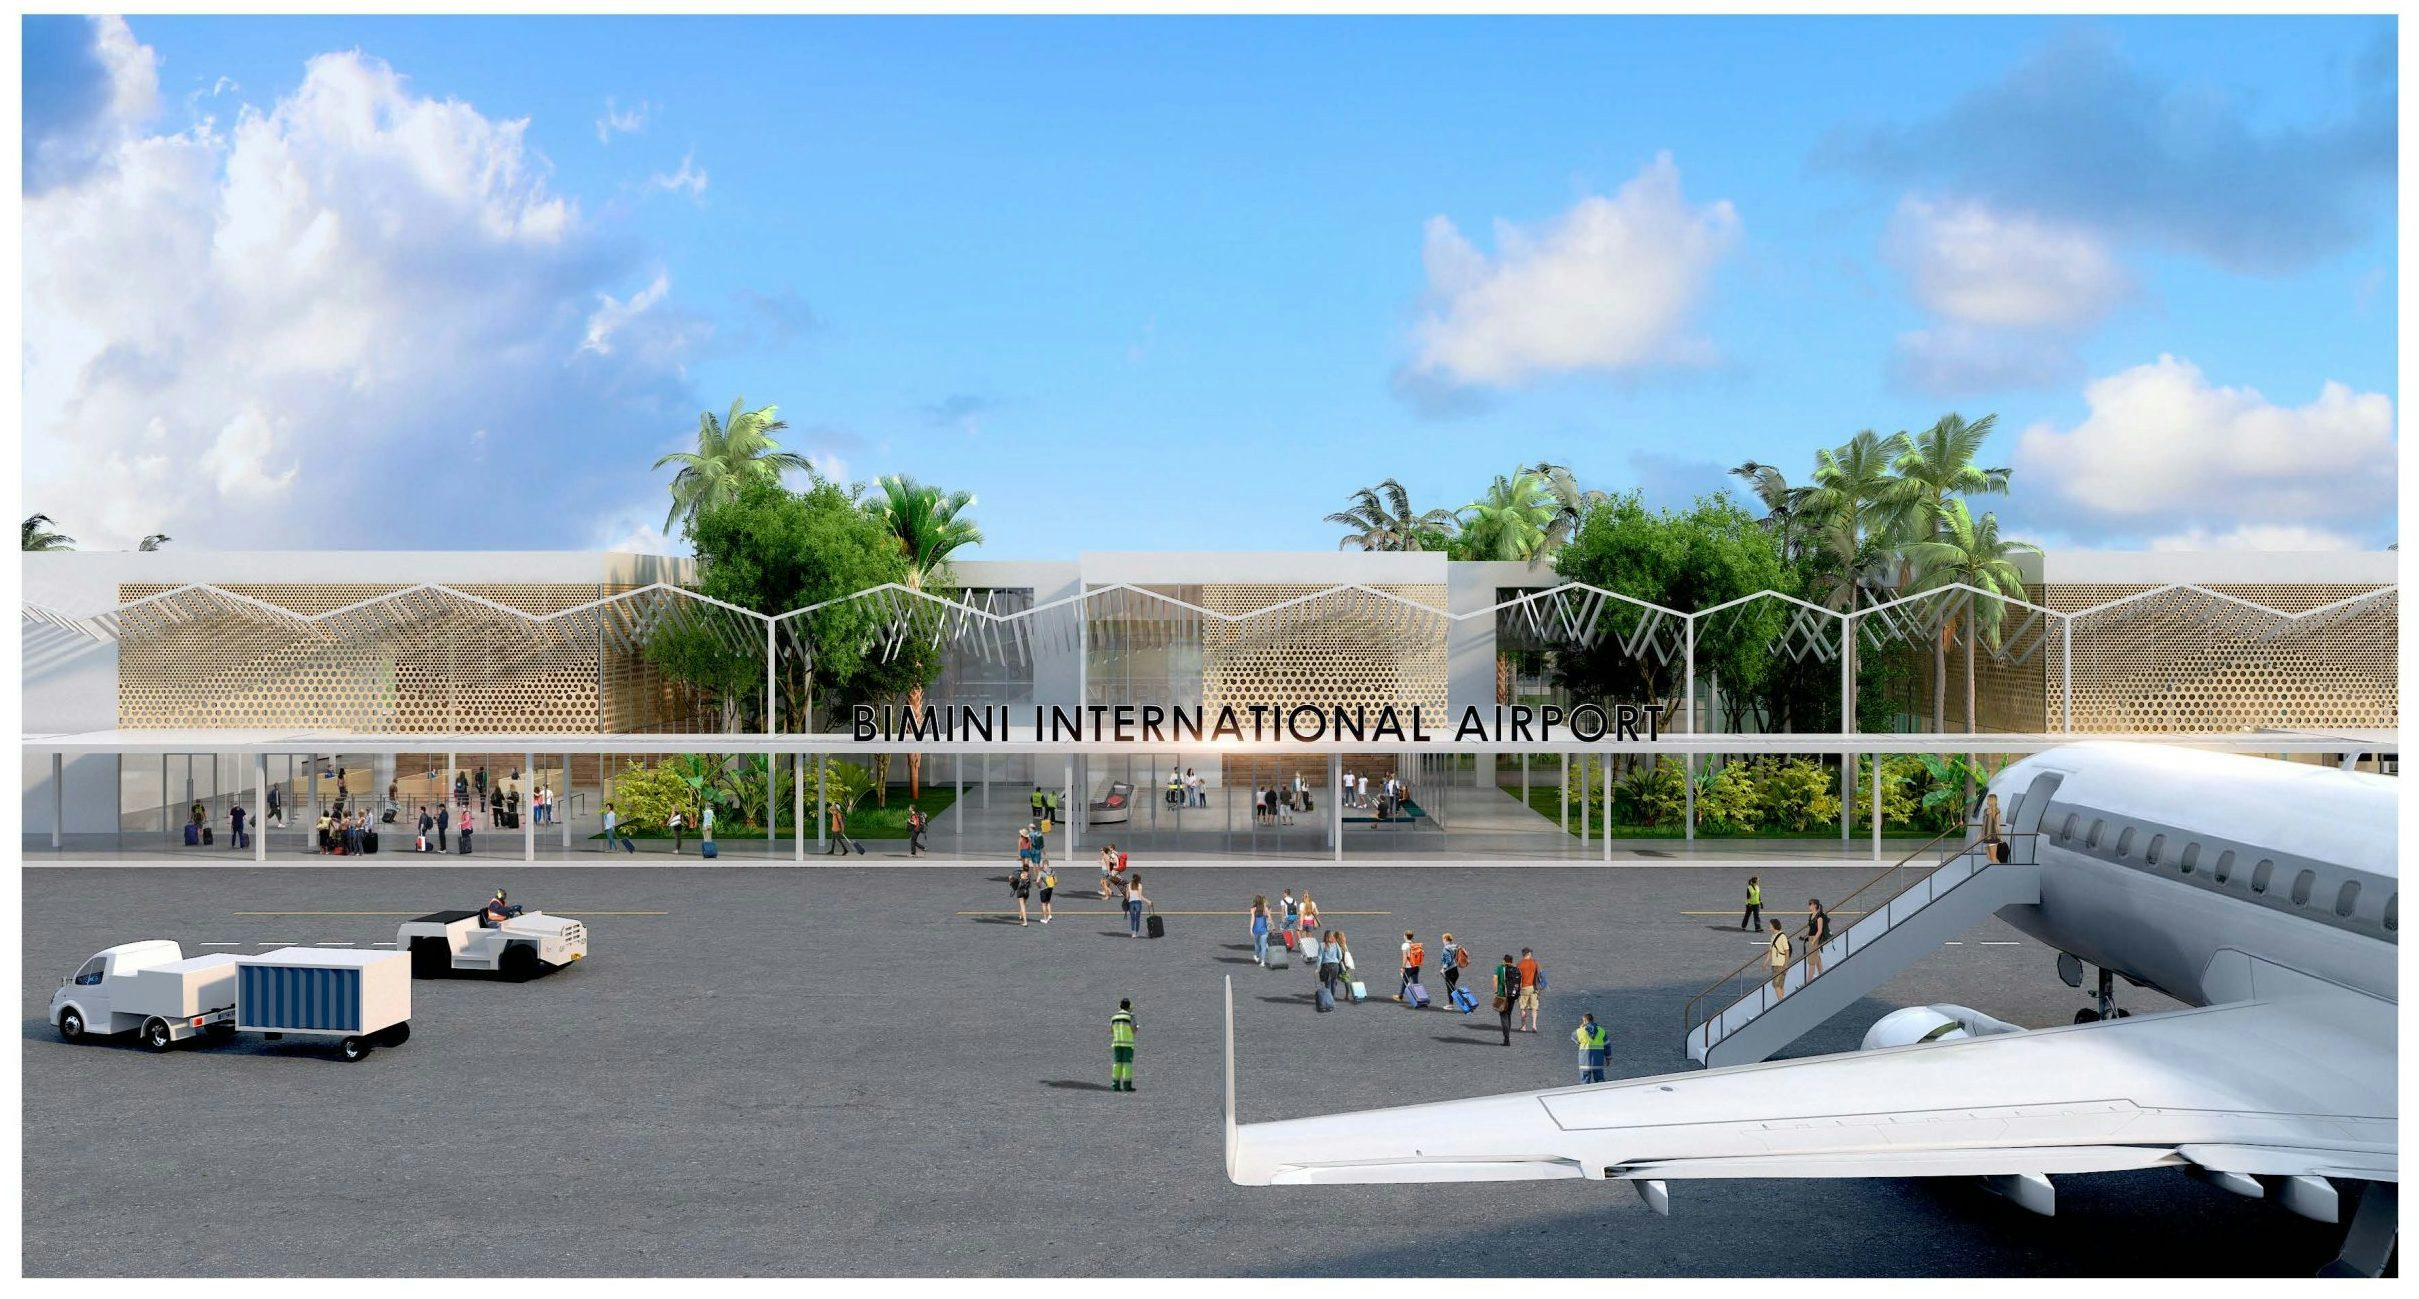 P3 brings economic opportunities to South Bimini Airport in the Bahamas image